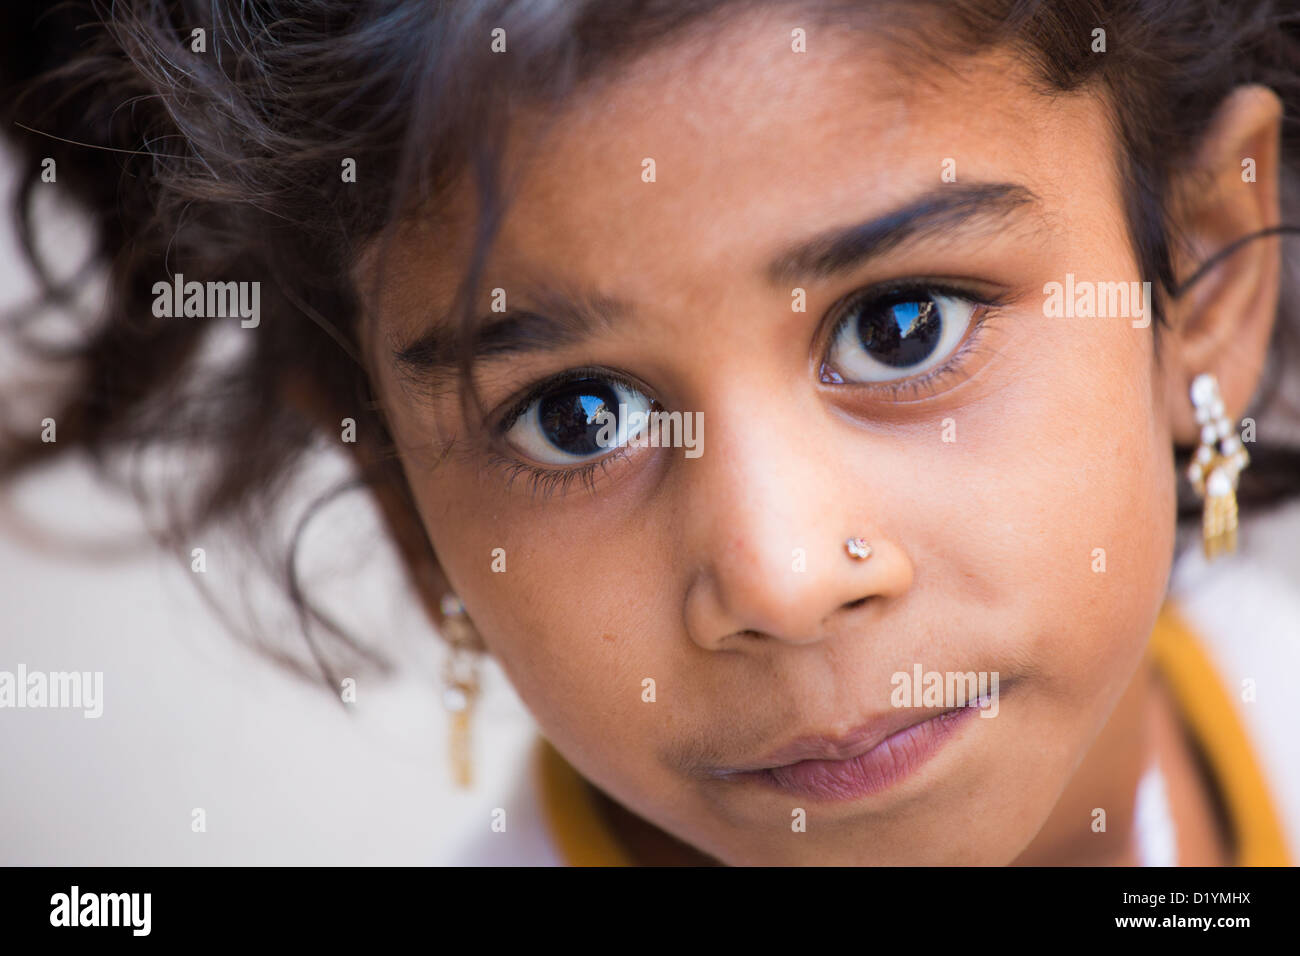 Young Indian girl in Delhi, India Stock Photo